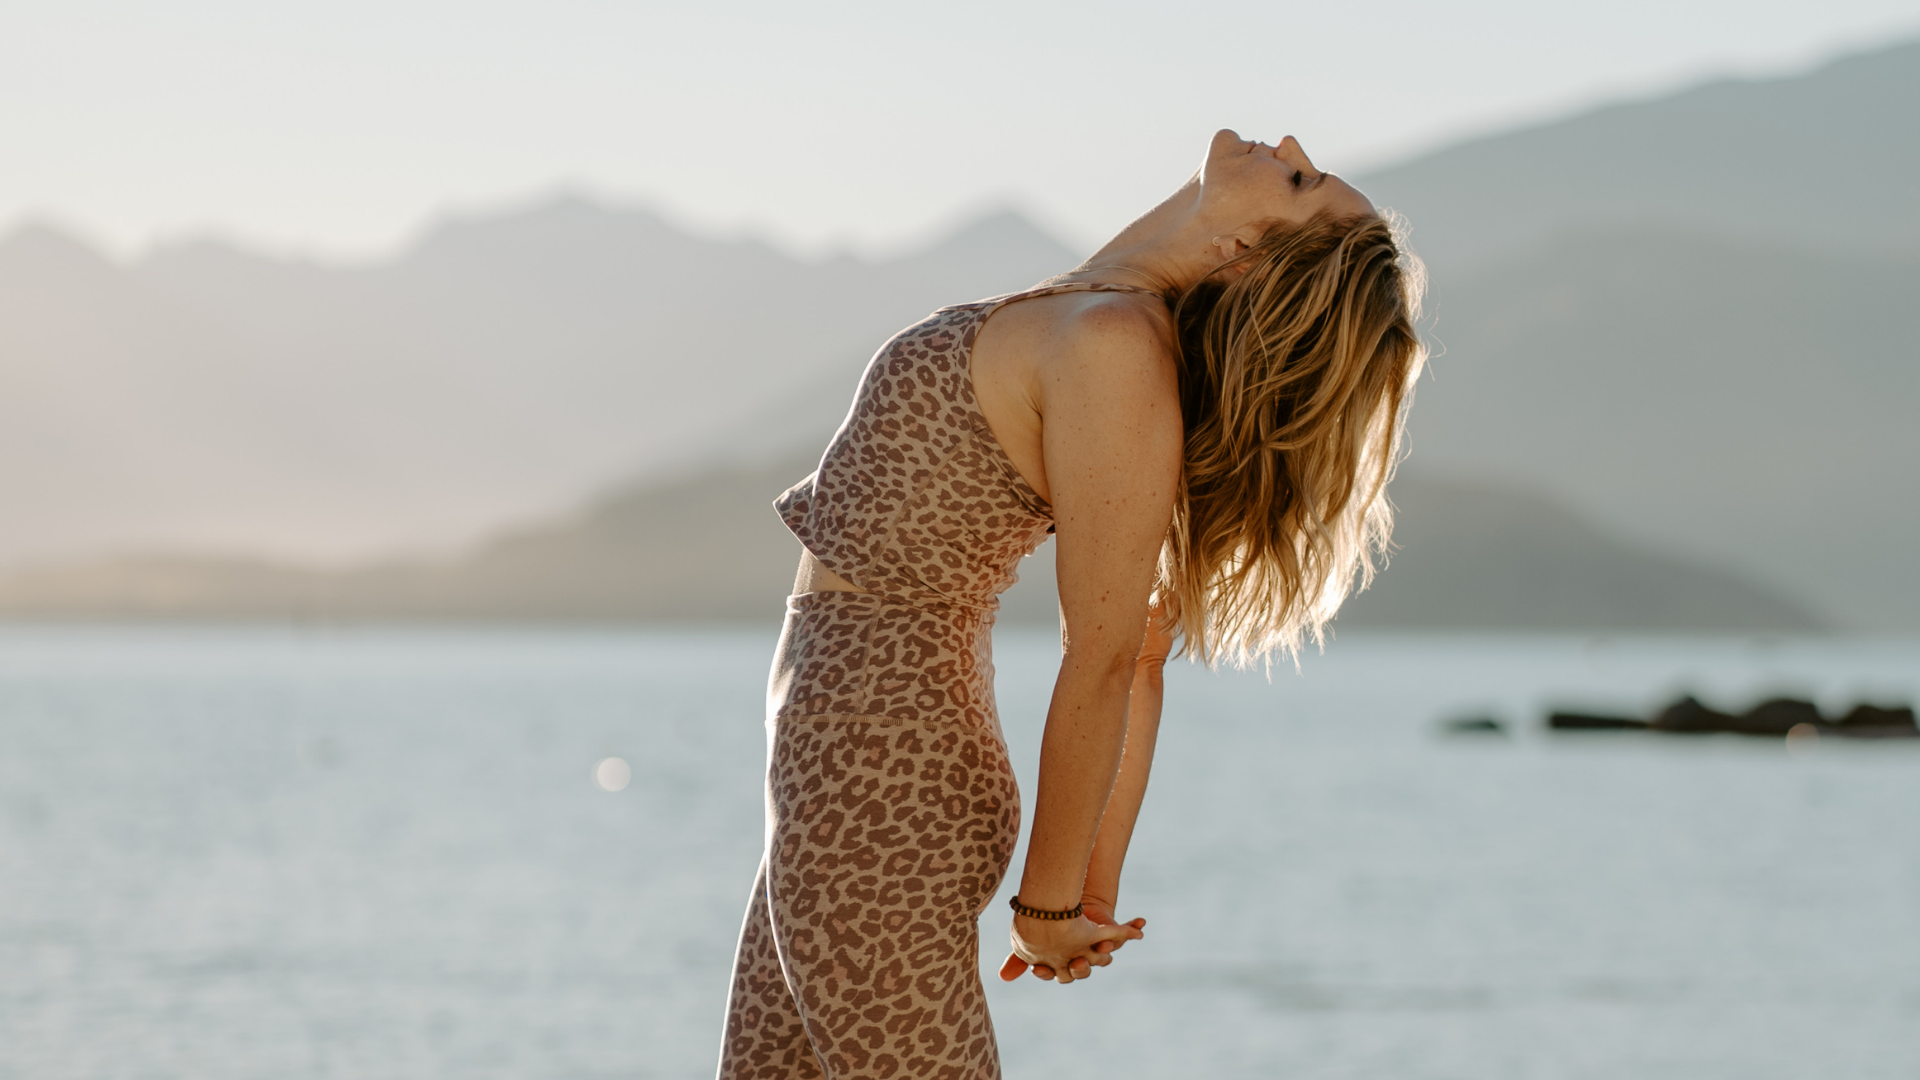 The 4 Secrets to Living an Aligned Life